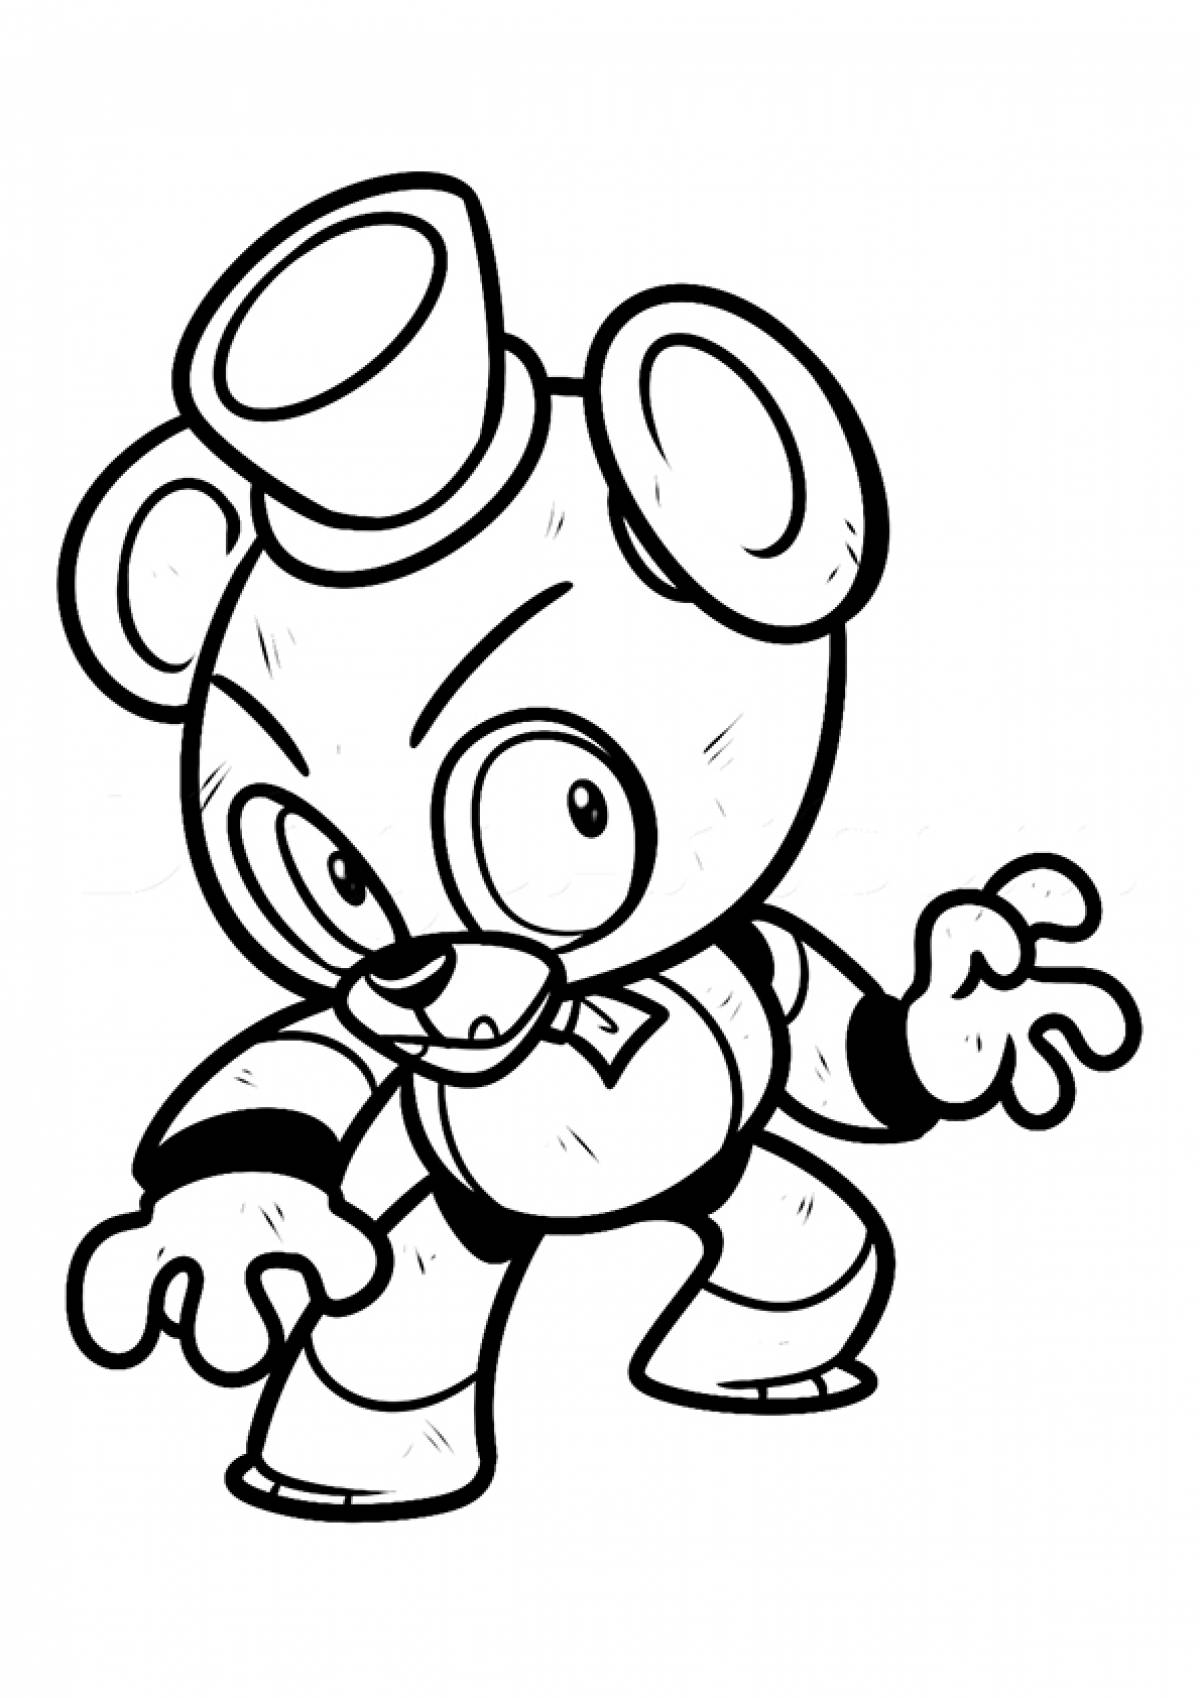 5 Nights at Freddy's coloring page